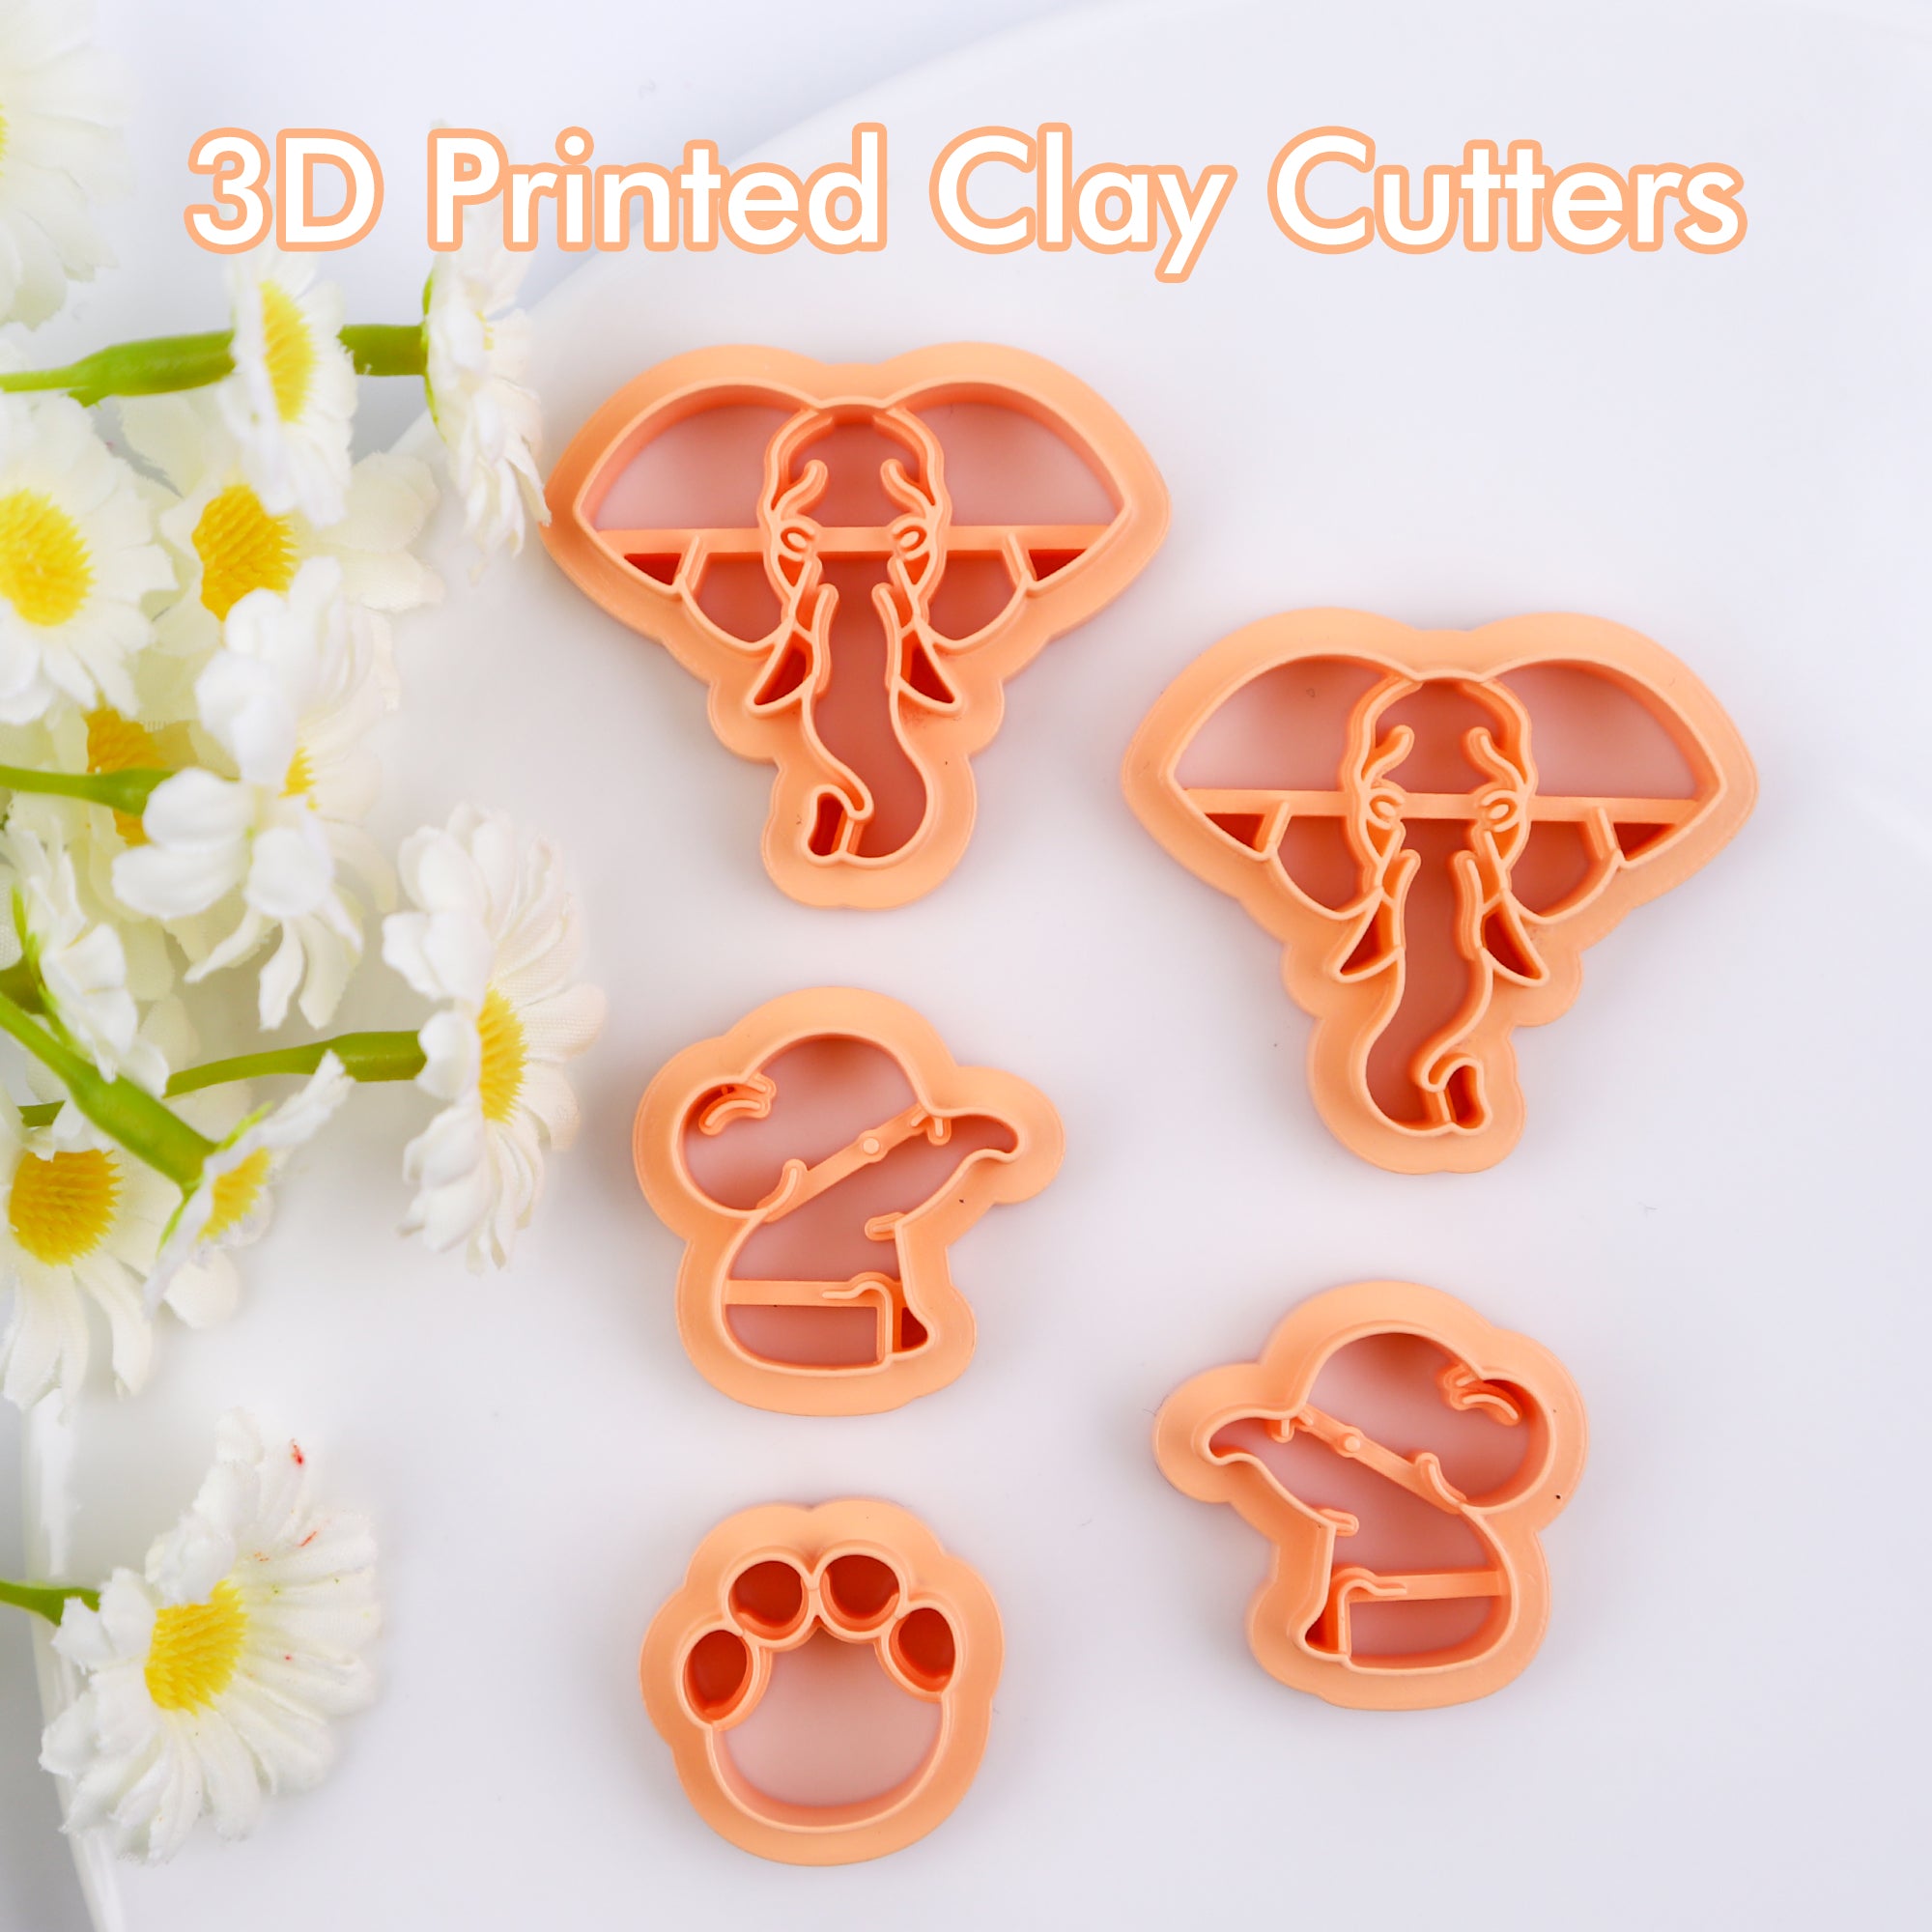 Puocaon Elephant Polymer Clay Cutters 5 Pcs